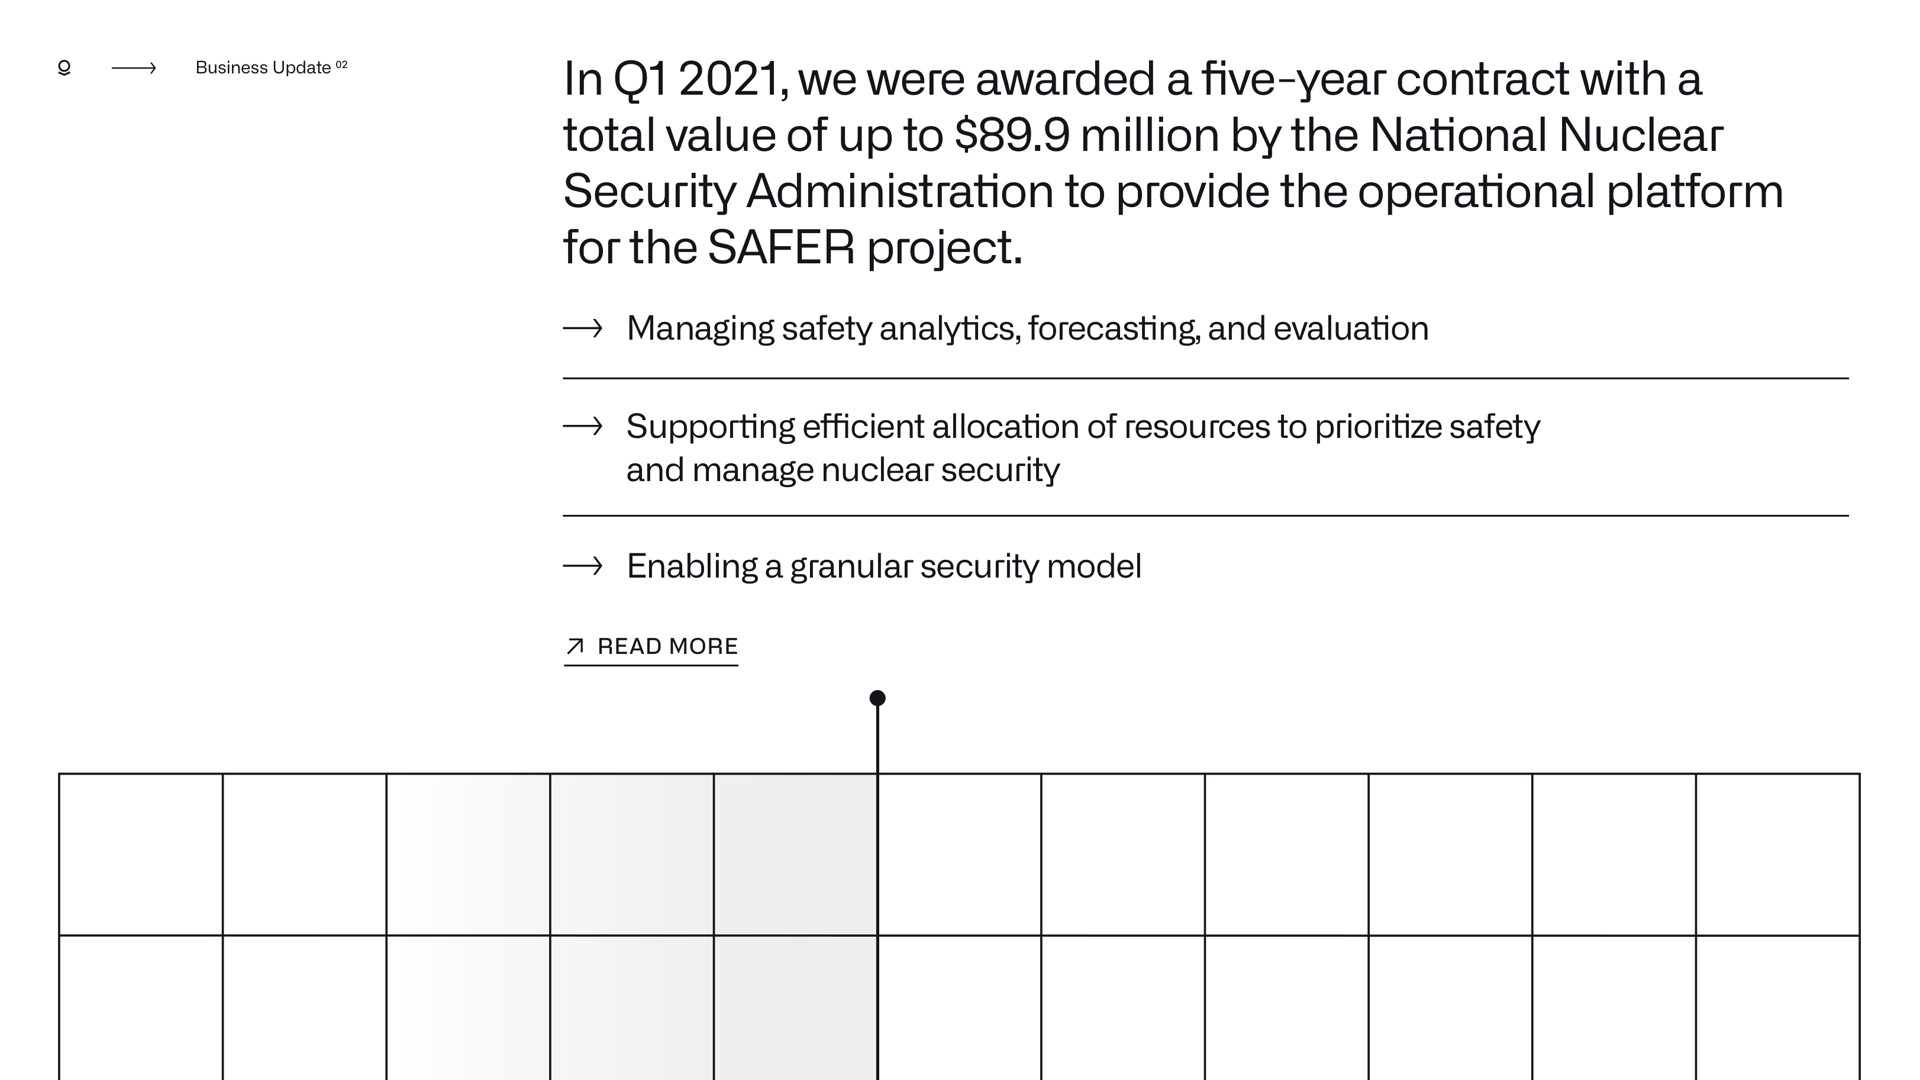 business in we were awarded a five year contract with a total value of up to million by the national nuclear security administration to provide the operational platform for the project | Palantir